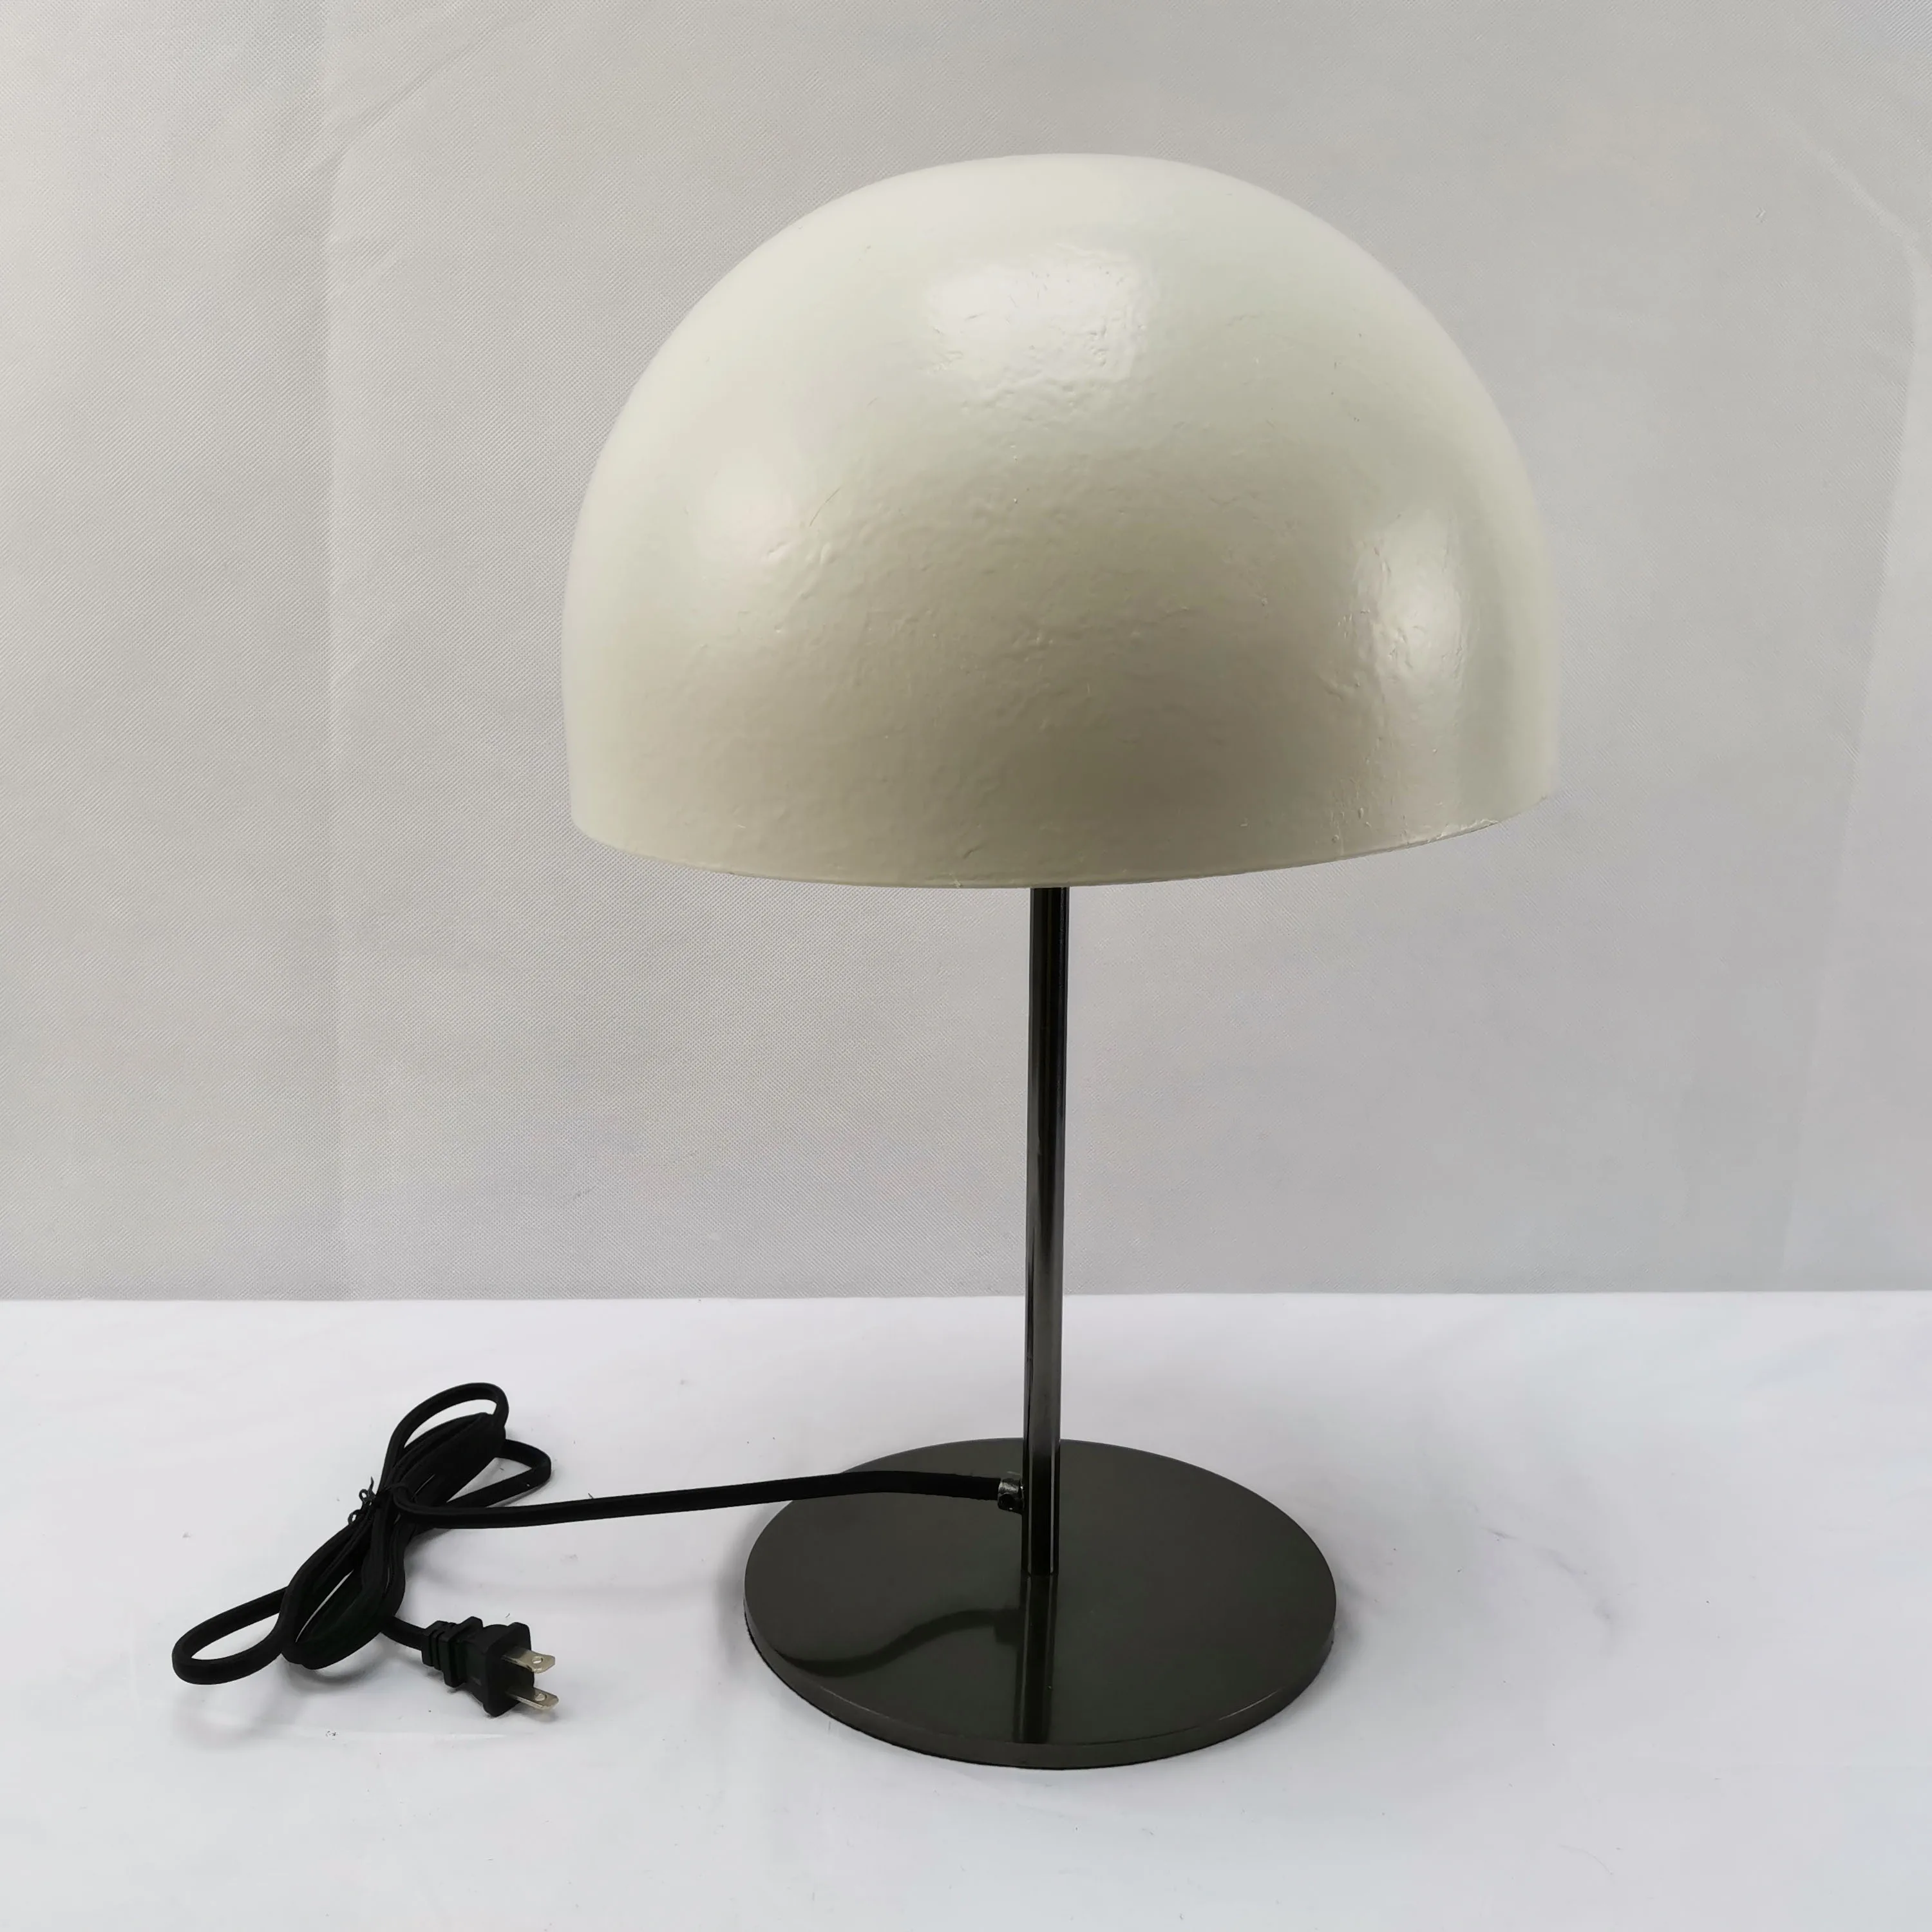 2020 hot selling modern iron table lamp white lampshade hotel bedside lamp table